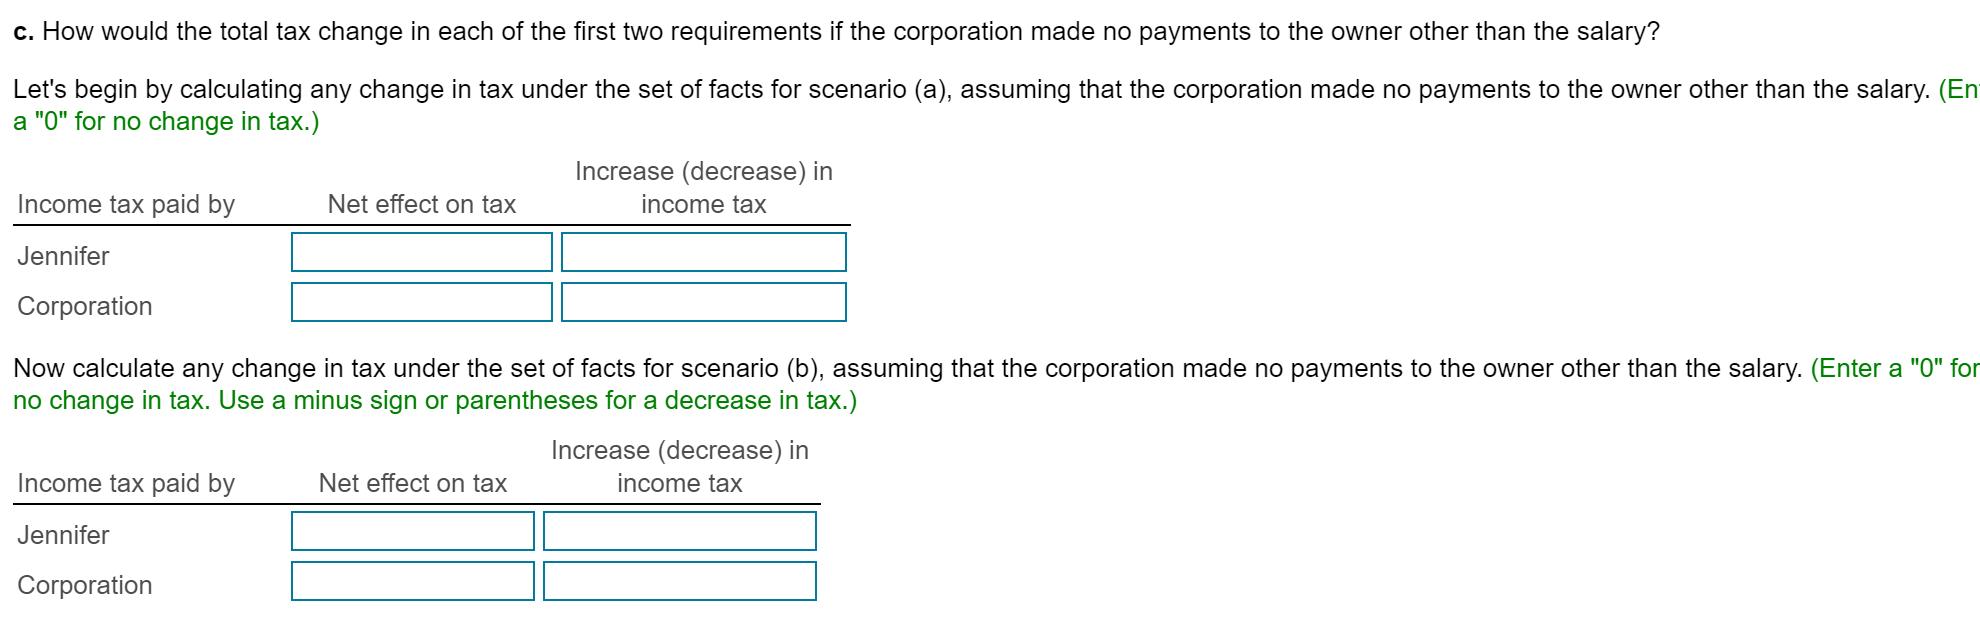 c. How would the total tax change in each of the first two requirements if the corporation made no payments to the owner othe